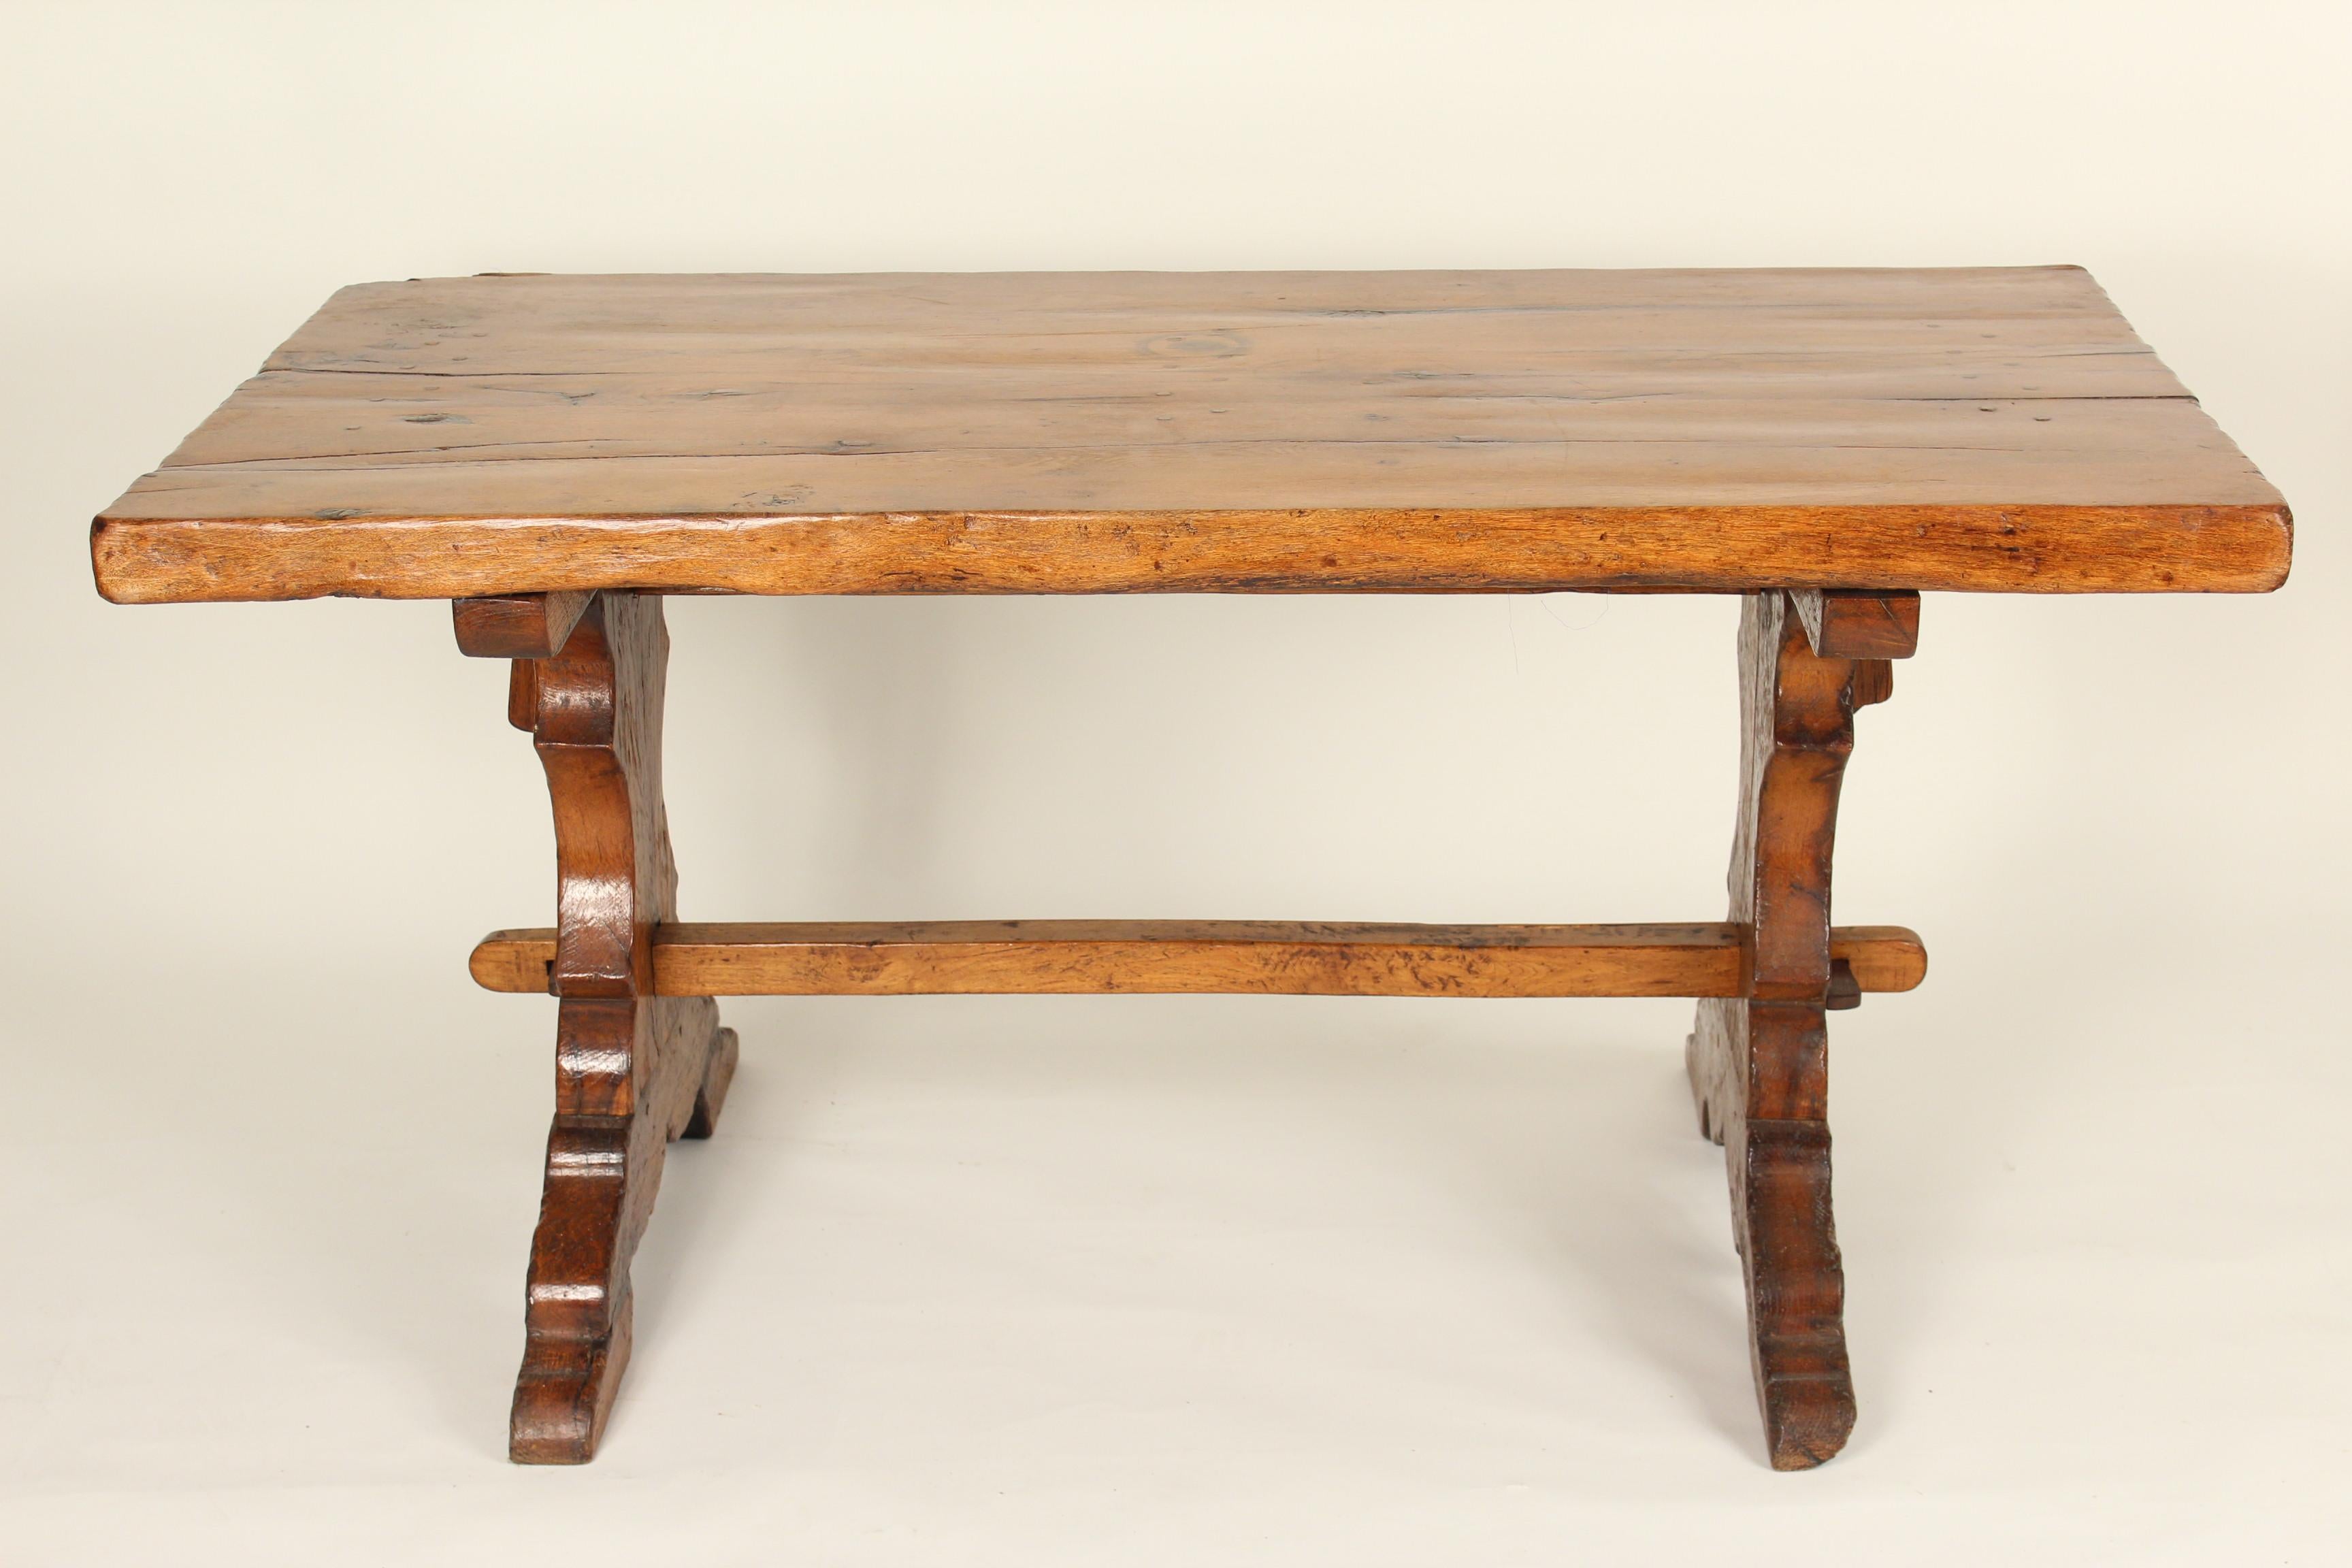 Baroque style continental fruitwood trestle style dining room table, 19th century. This table could also be used as a writing table. Mortise and tenon construction and nice old color.